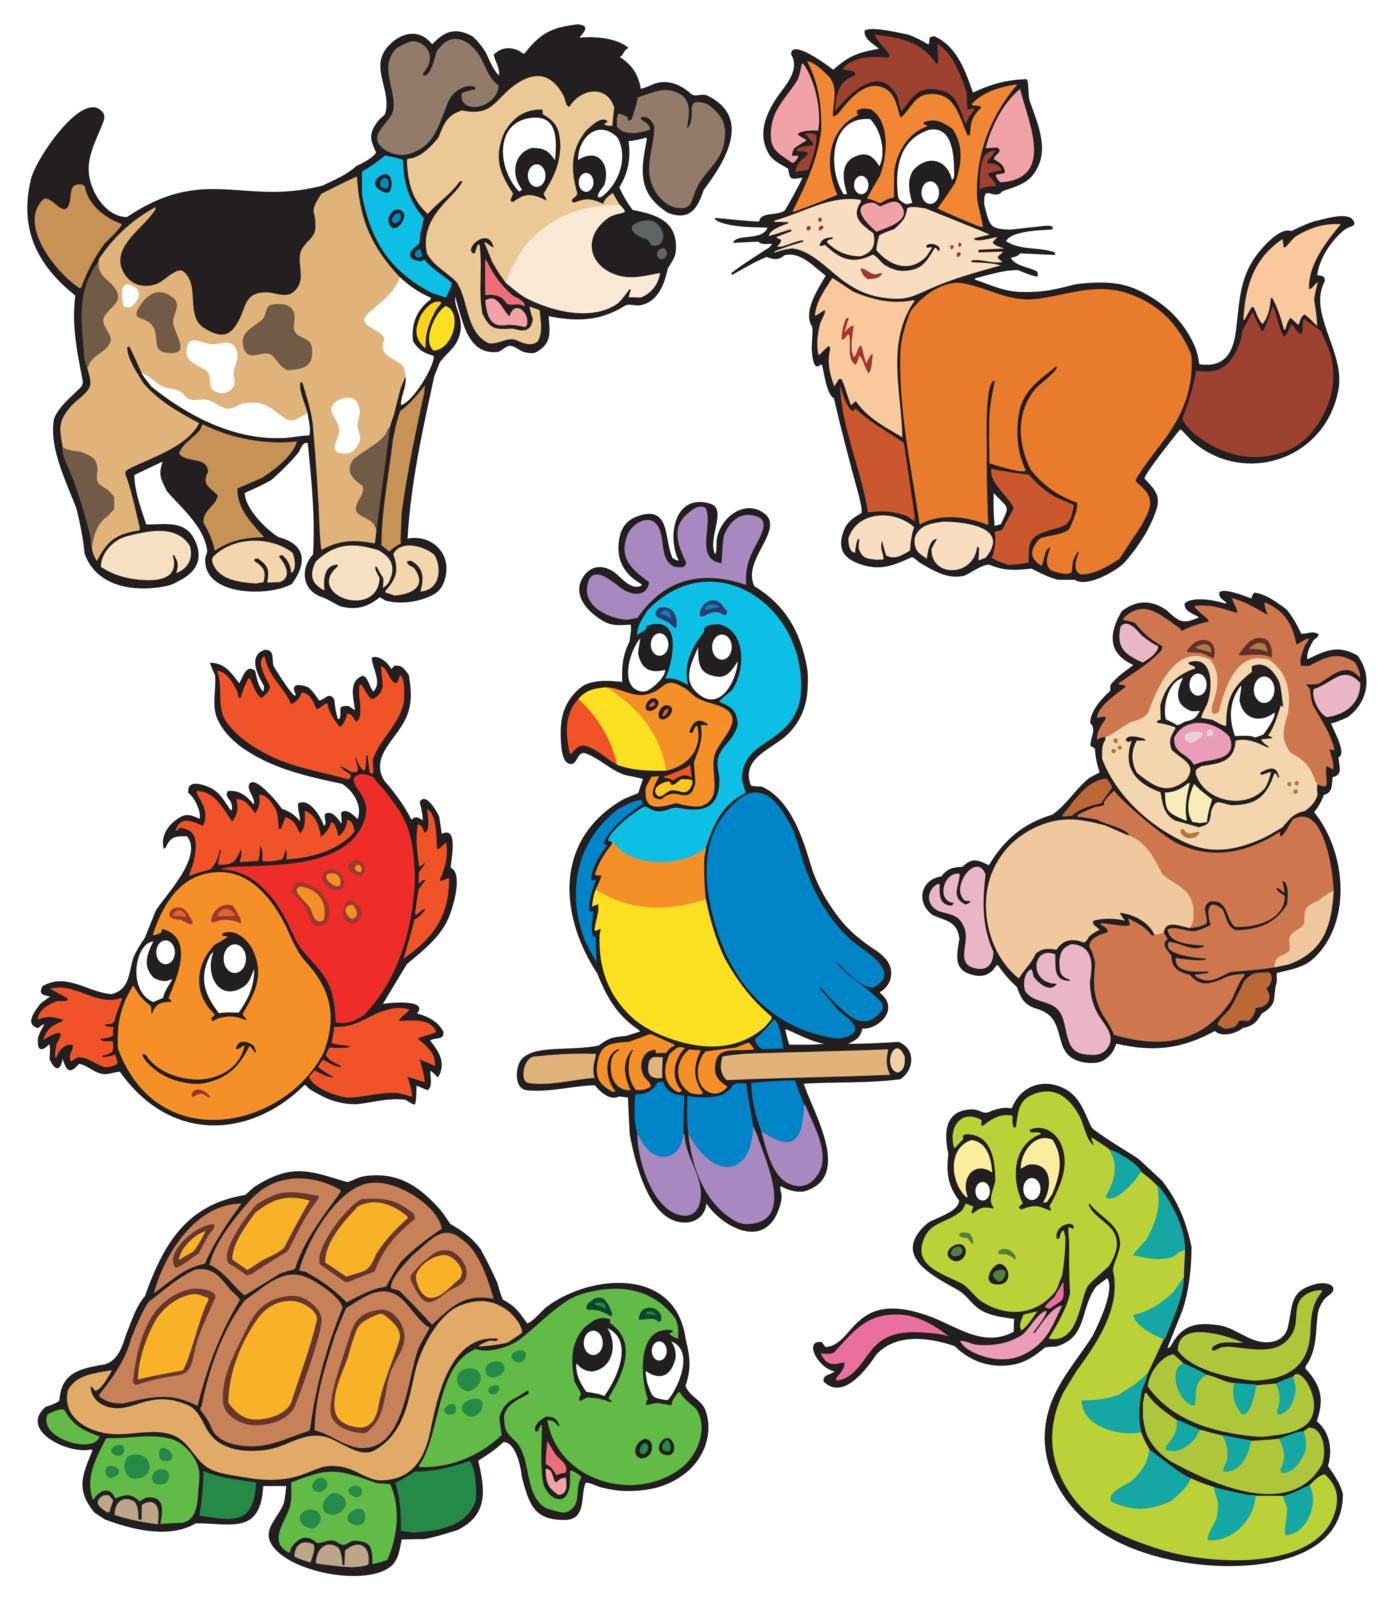 Pet cartoons collection - vector illustration.